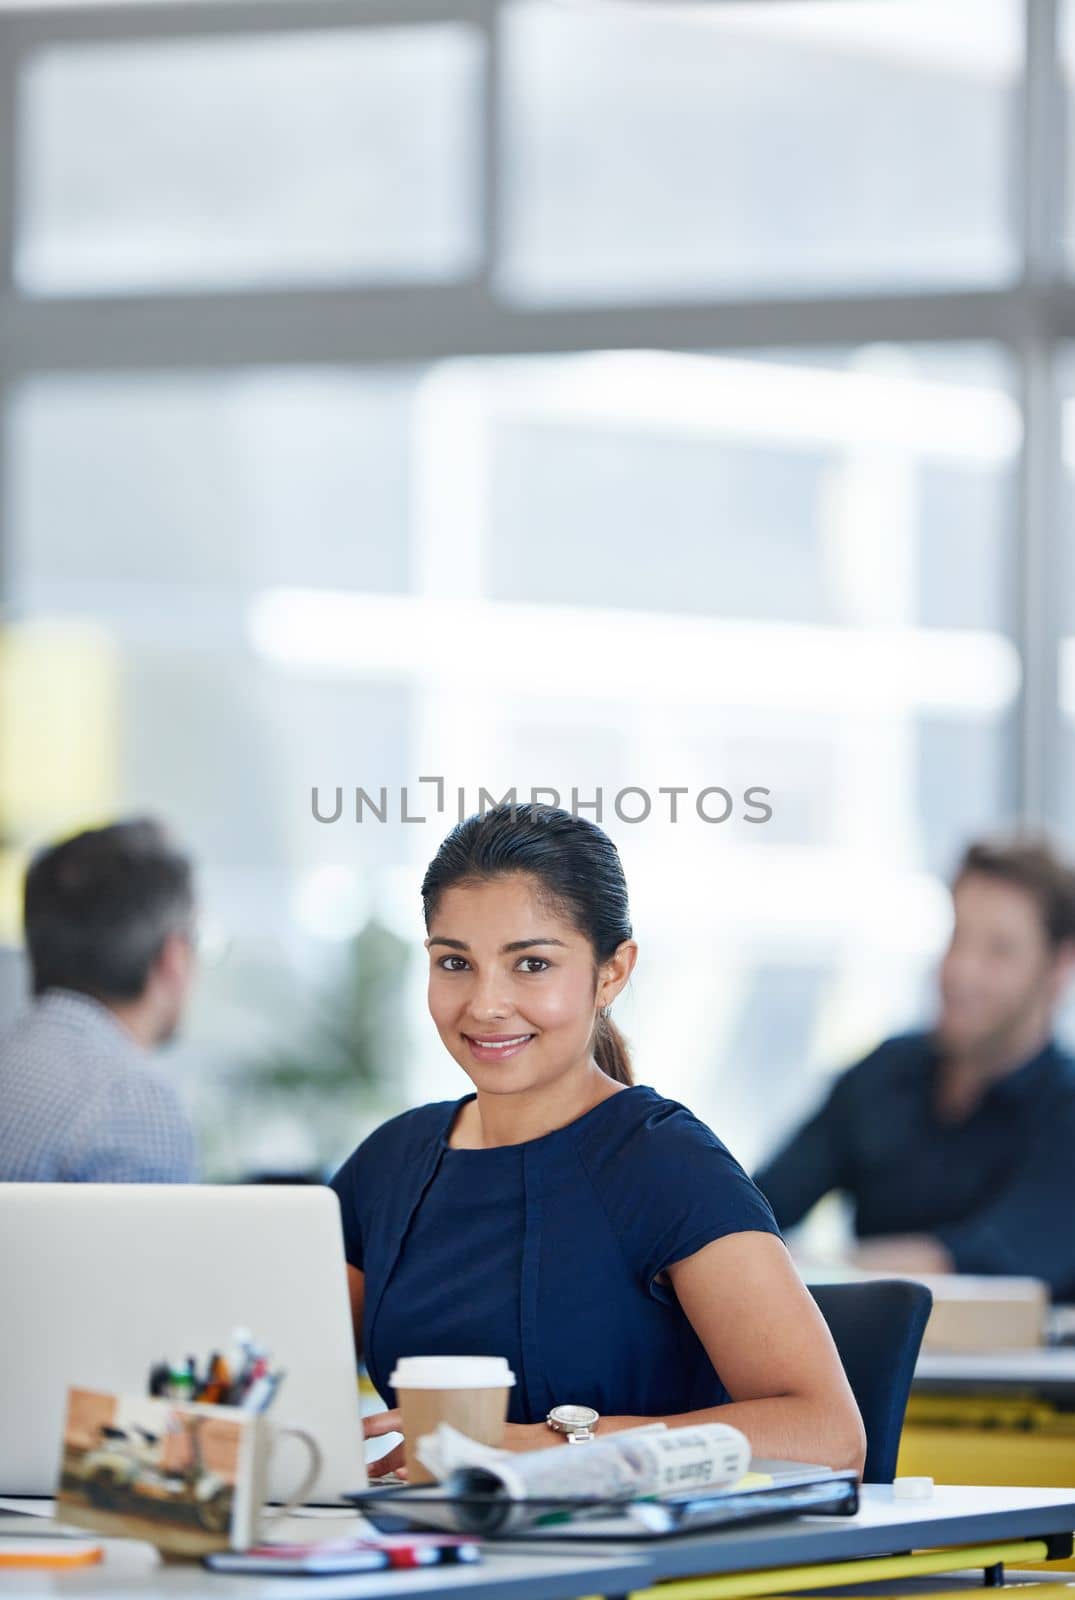 She brings a fresh energy into the office. Portrait of a designer sitting at her desk working on a laptop with colleagues in the background. by YuriArcurs